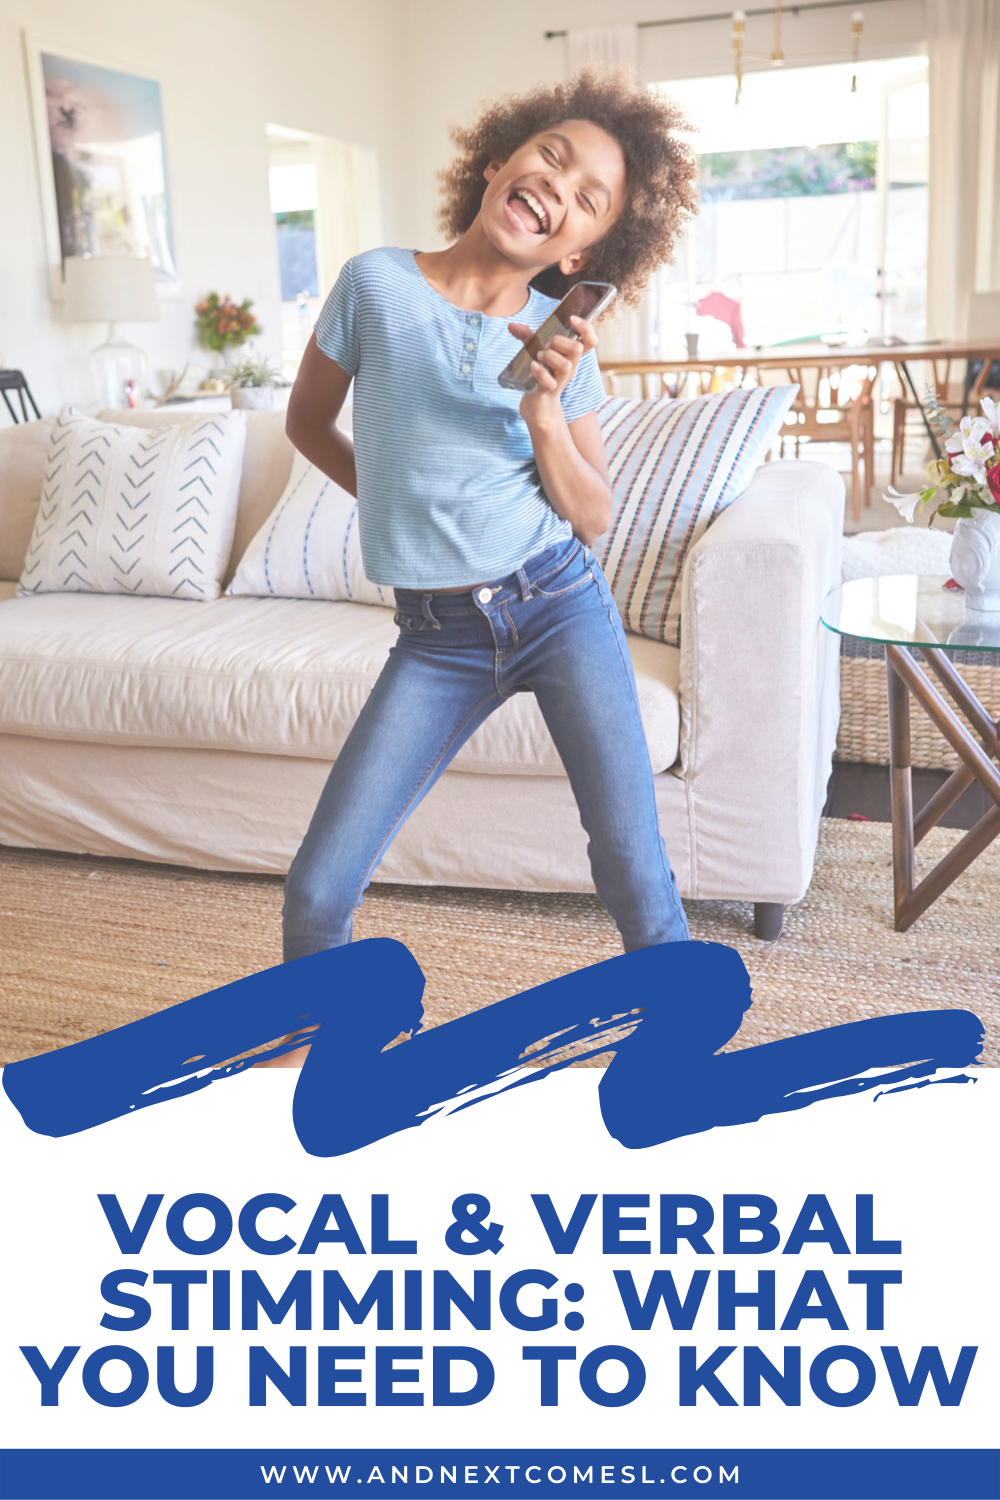 Vocal stimming & verbal stimming: what you need to know